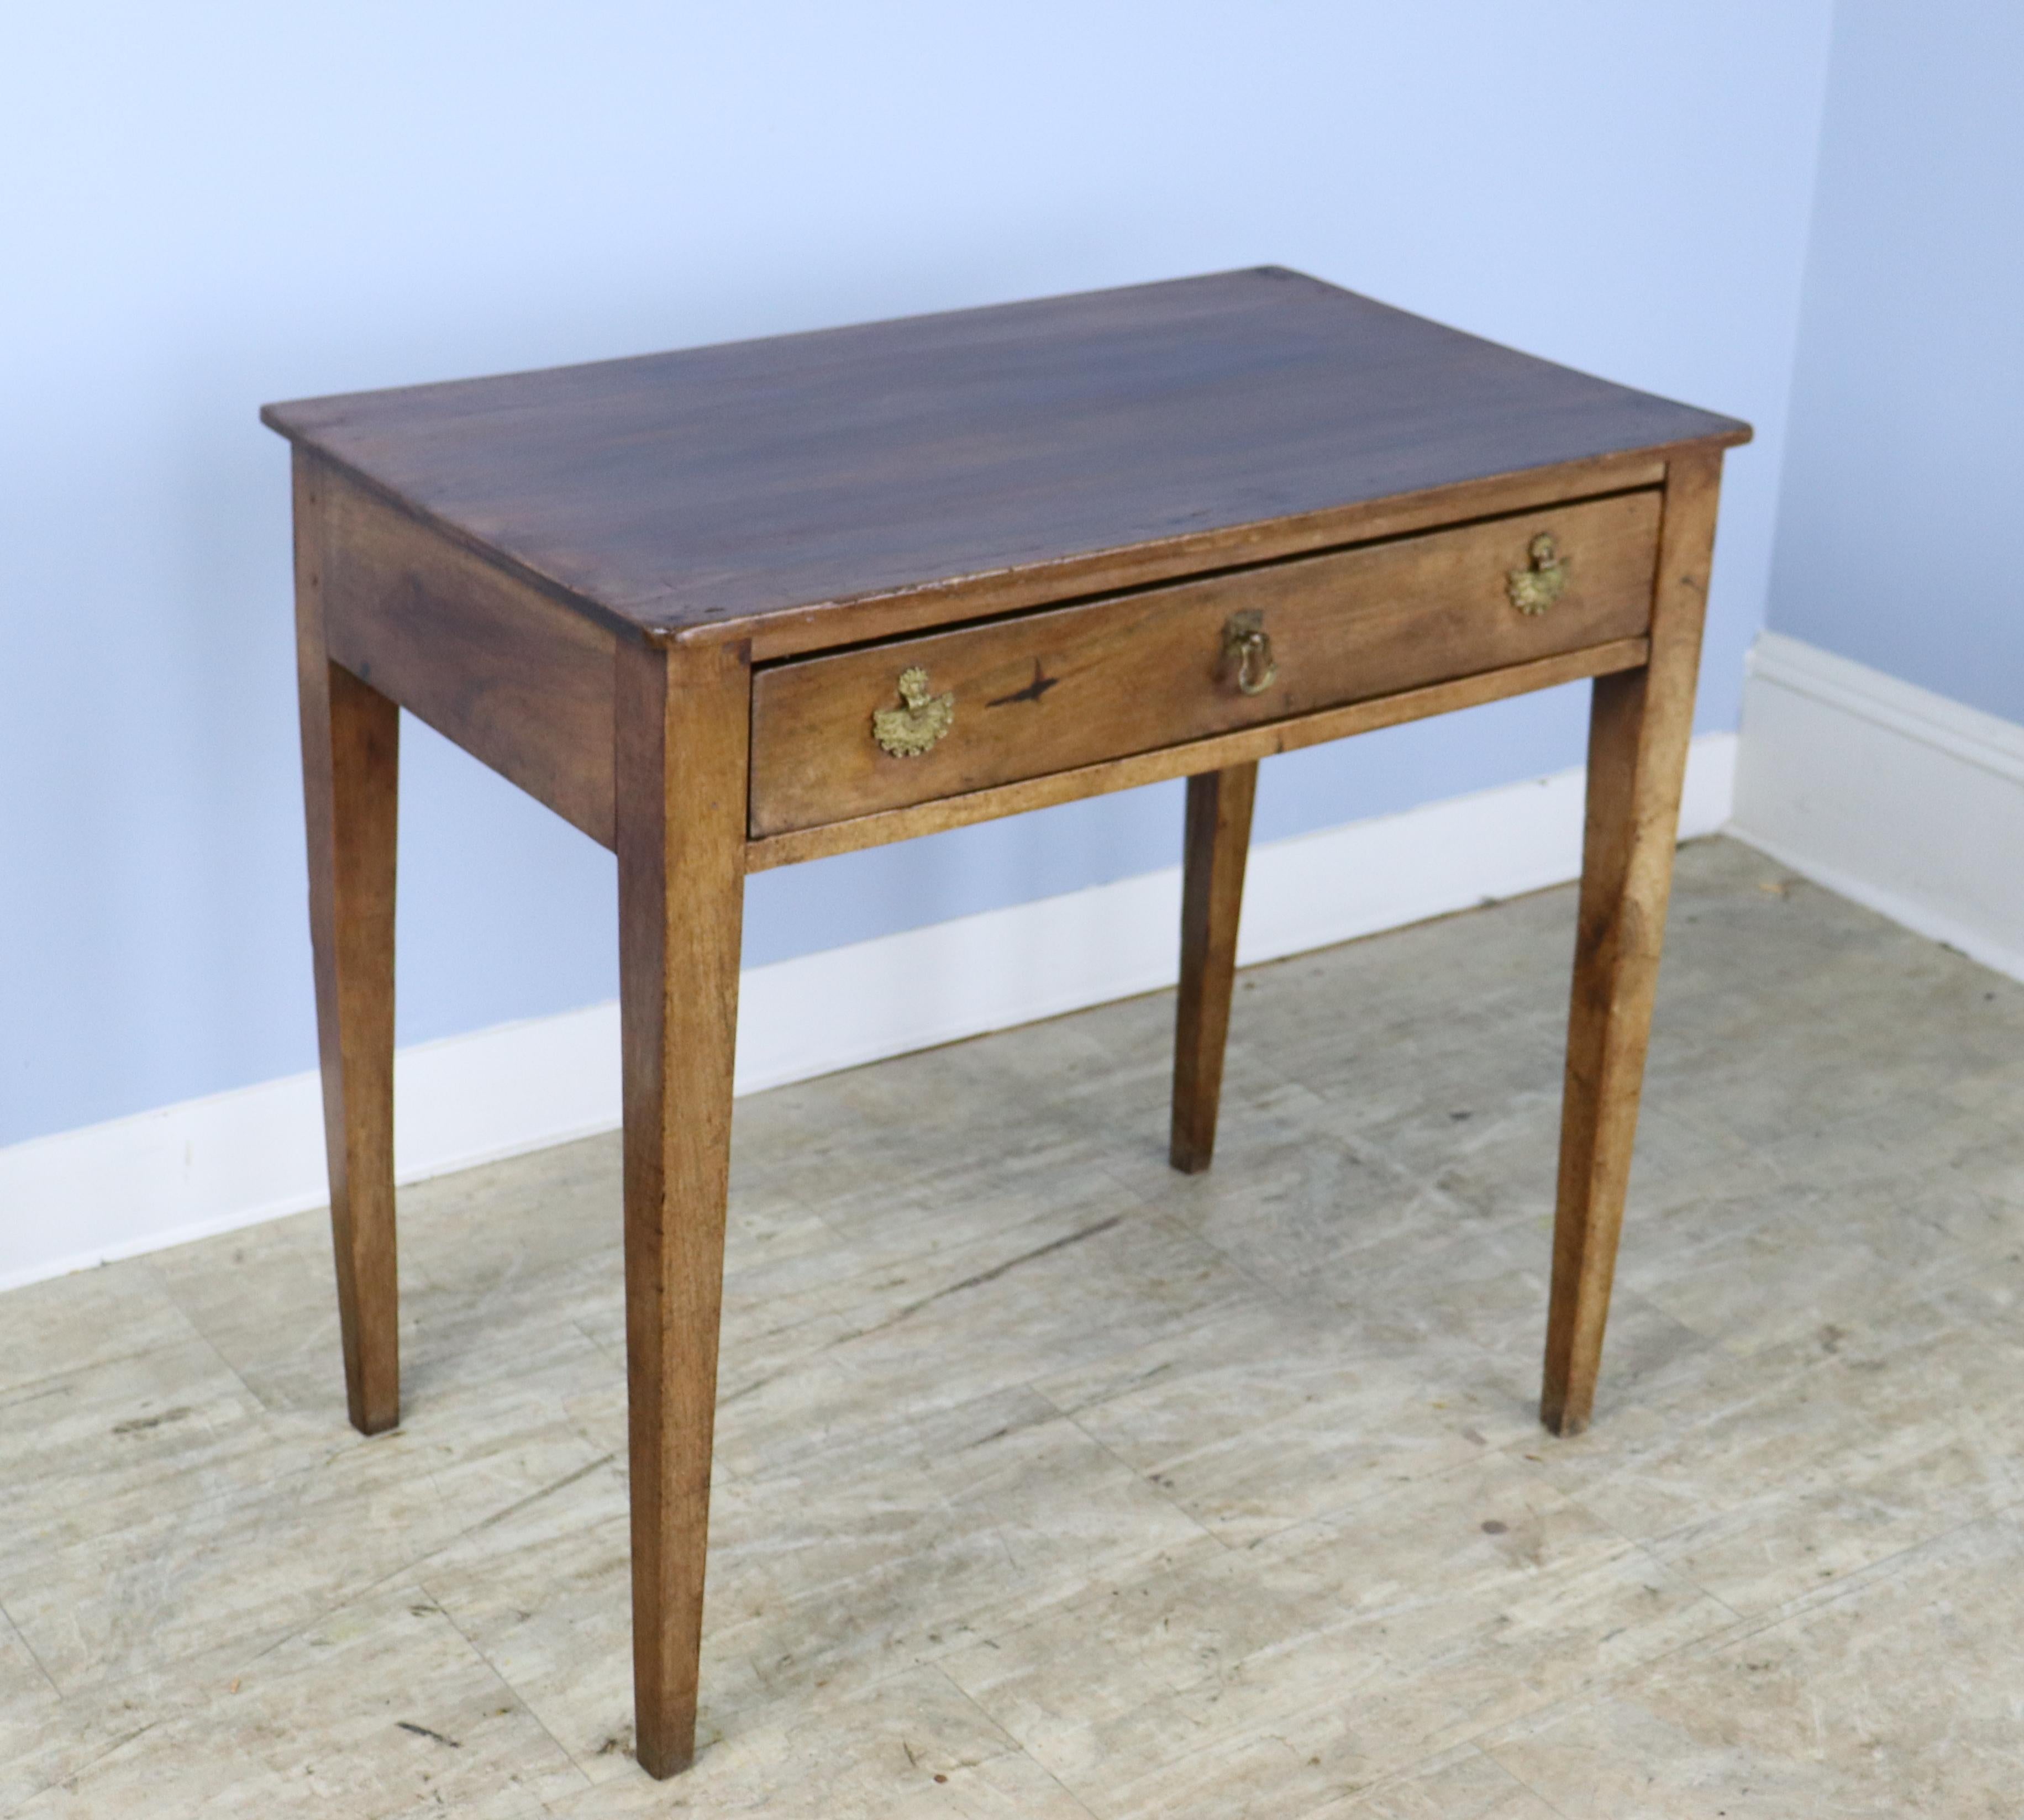 A pretty walnut side table with original pull and ornate brass escutcheons added later. There is a slight warp to the right front leg which does not affect the stability of the piece. No wobbles! Useful divided space inside the single drawer.